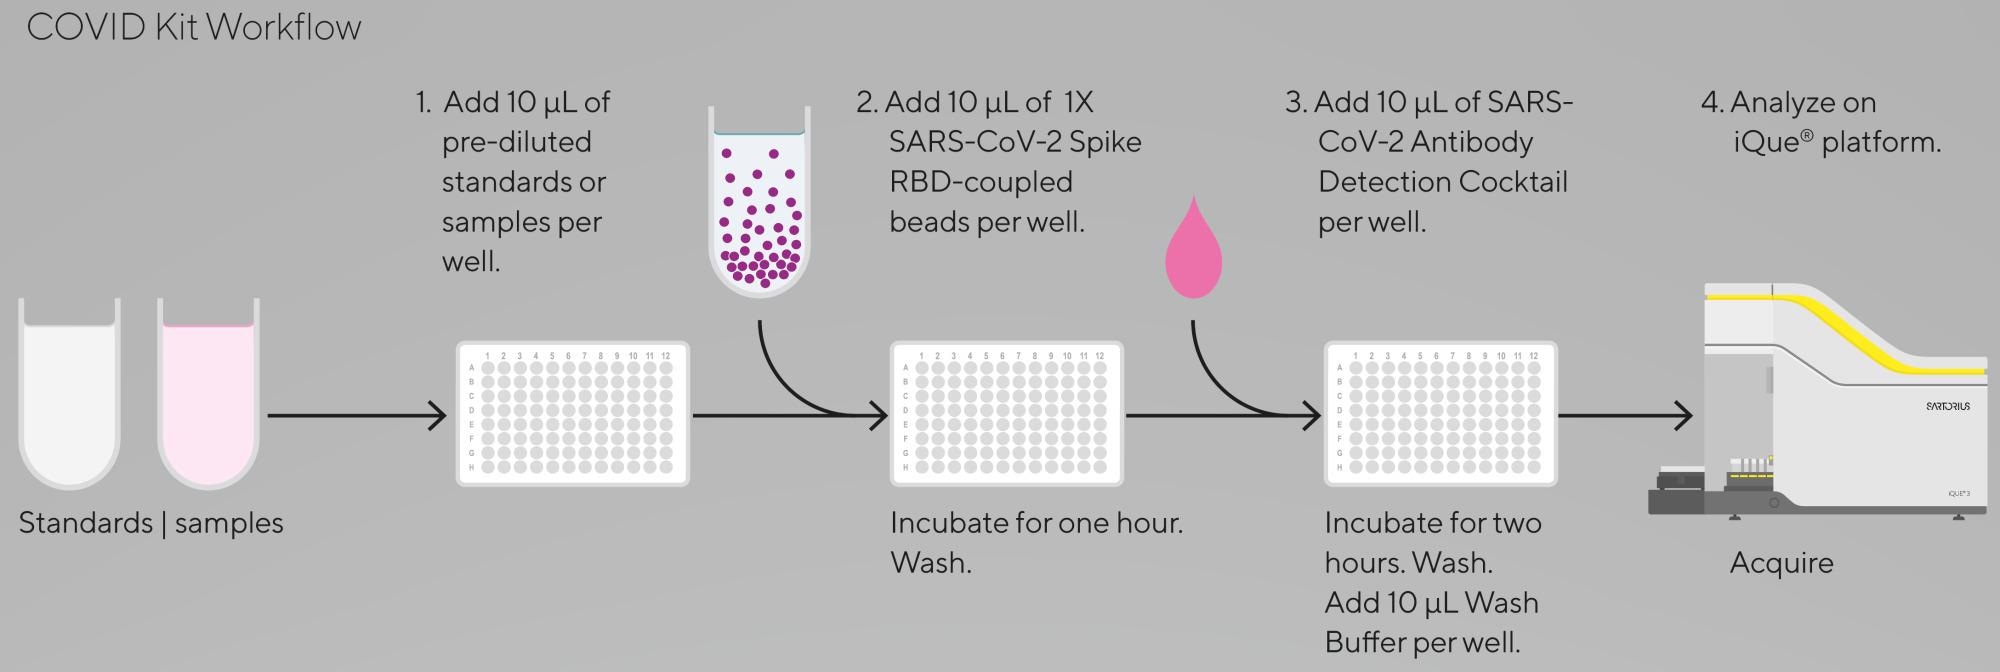 iQue® SARS-CoV-2 (IgG, IgM and IgA) Kit workflow. Easy to follow steps and low sample volumes needed (requires only a single 10 µL of plasma / serum diluted at least 100-fold).